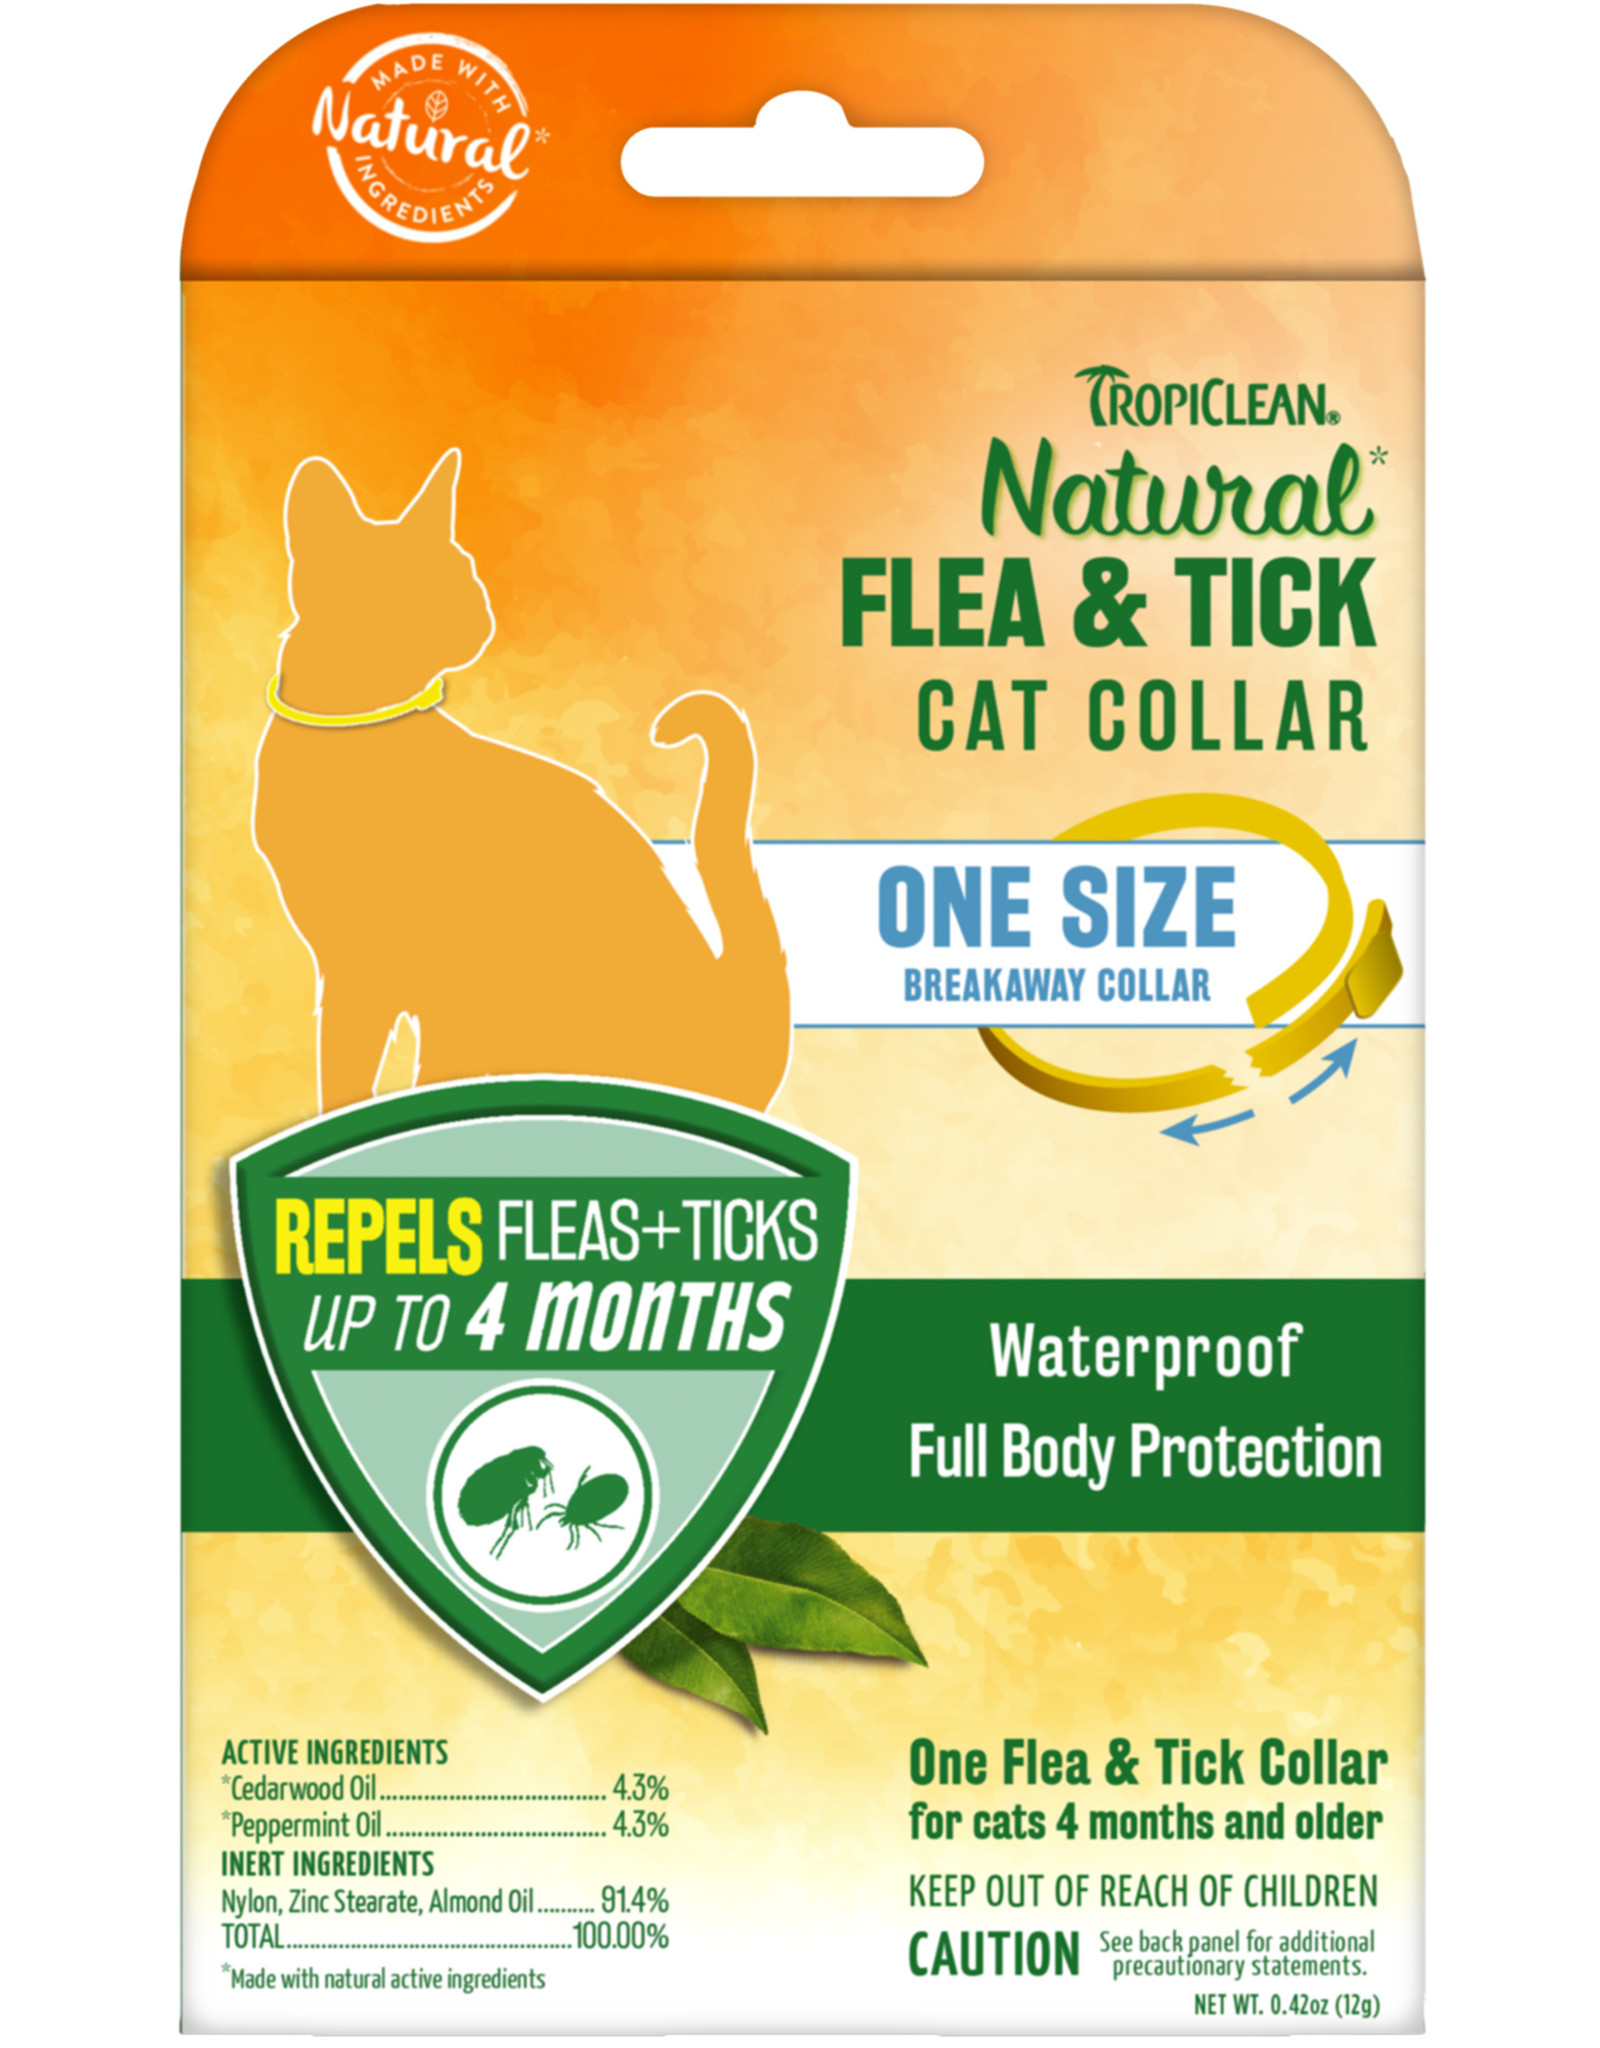 TropiClean Natural Flea & Tick Repellent Collar for Cats One Size